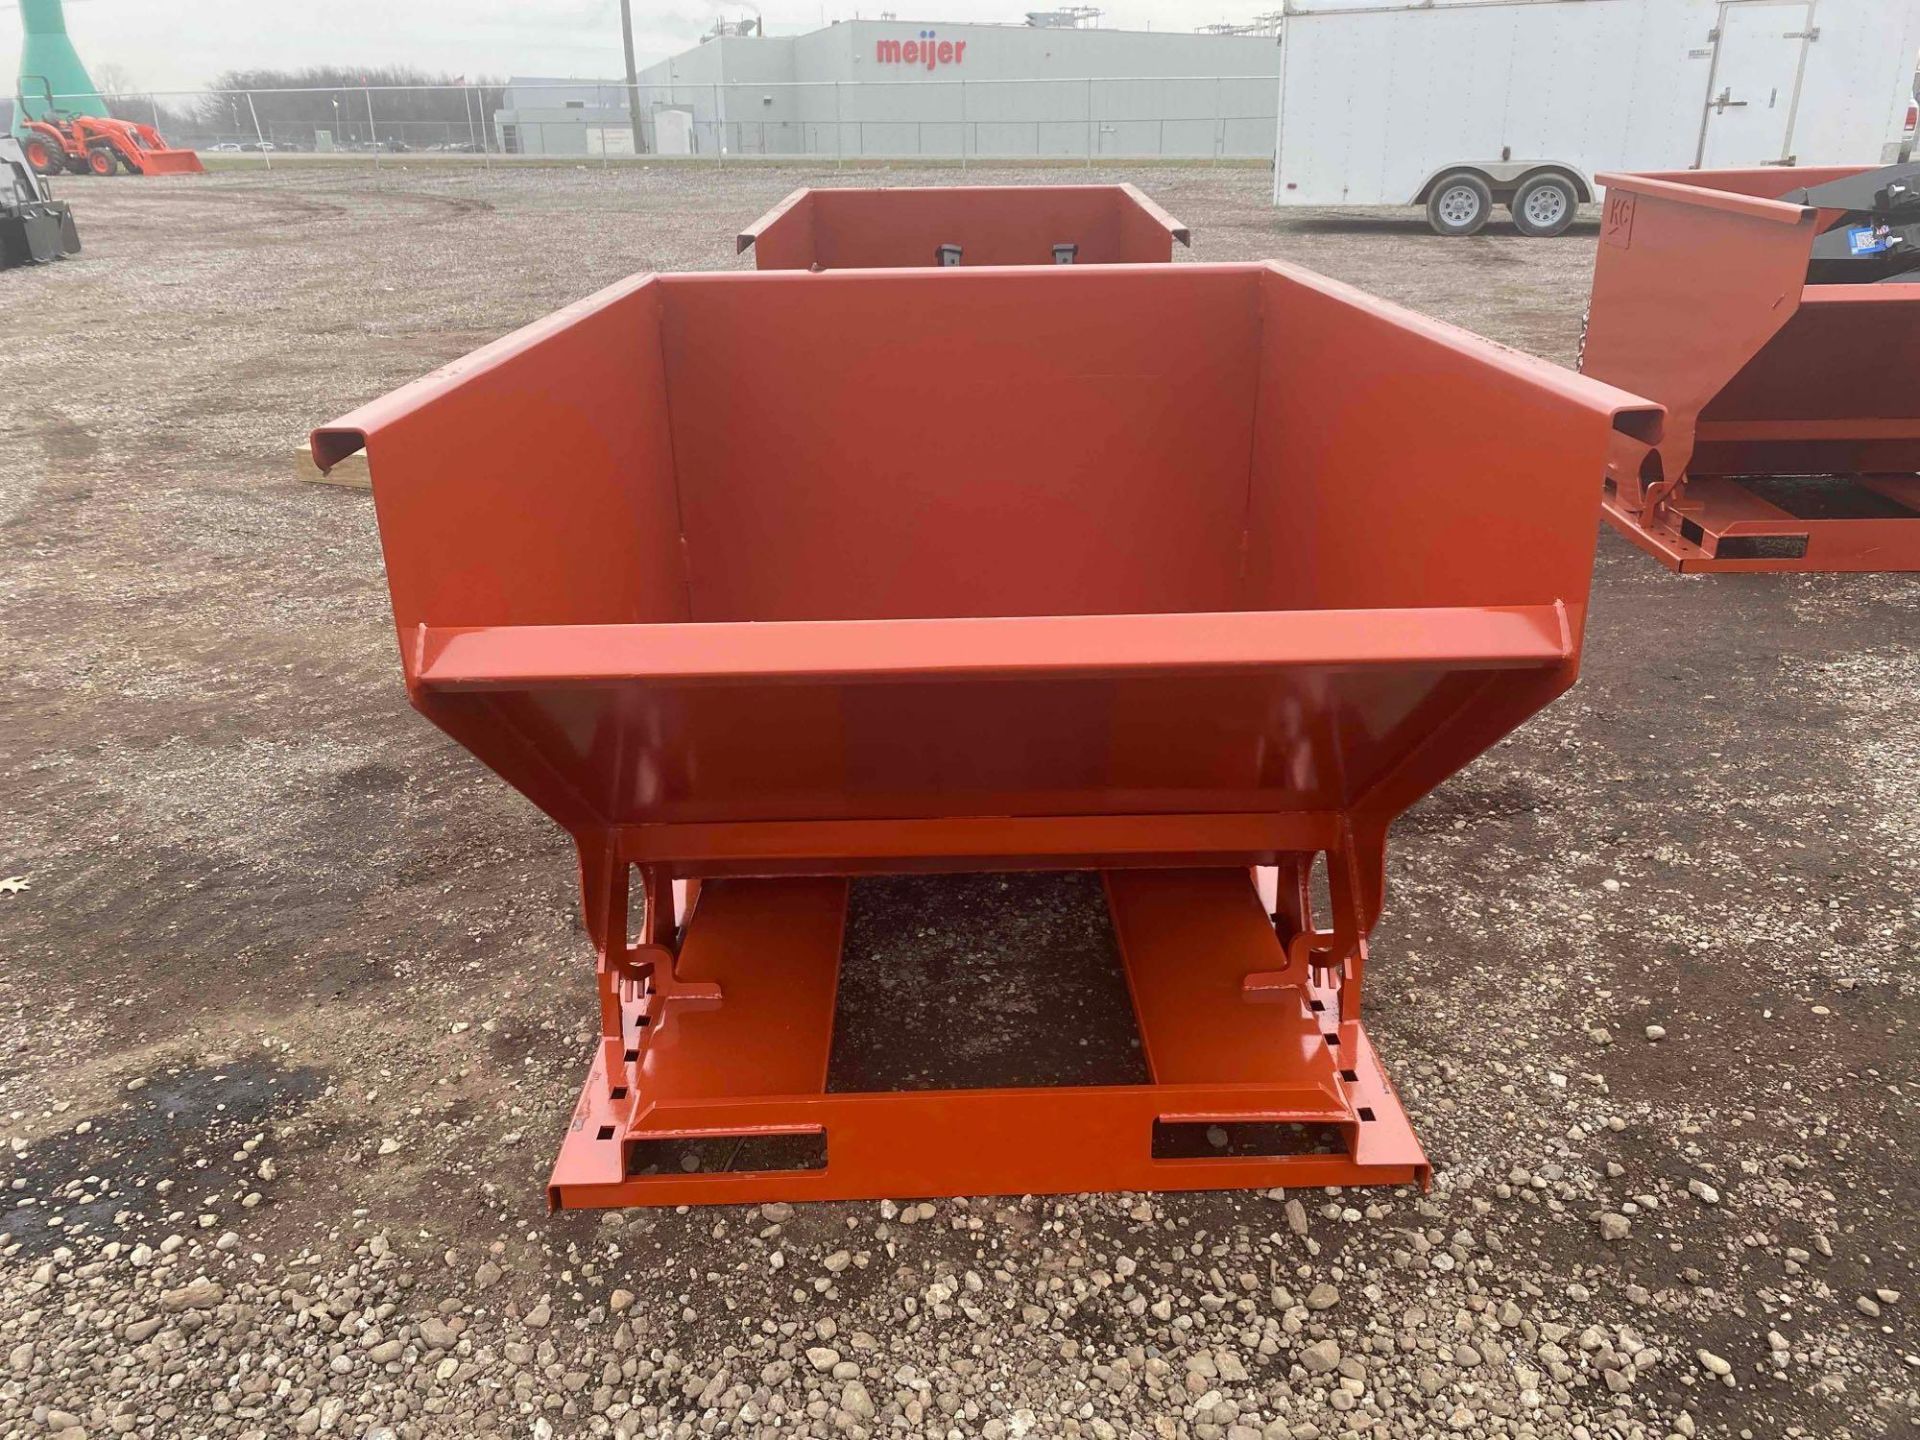 New 2 Cubic Yard Self Dumping Hopper with Fork Pockets - Image 5 of 6